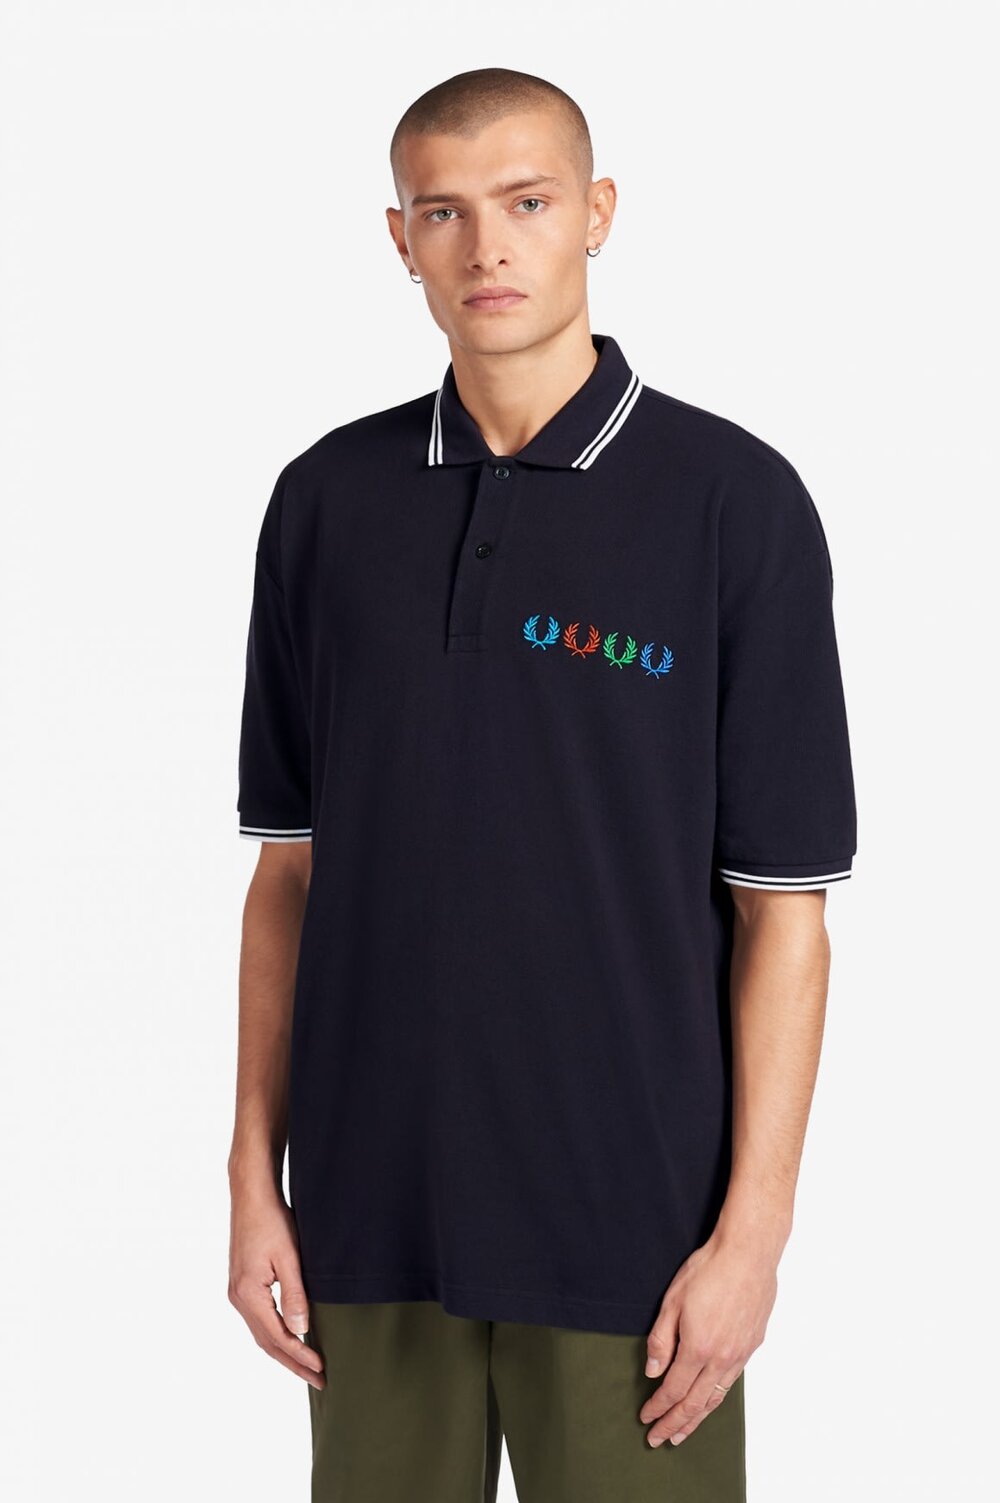 fred-perry4.jpg